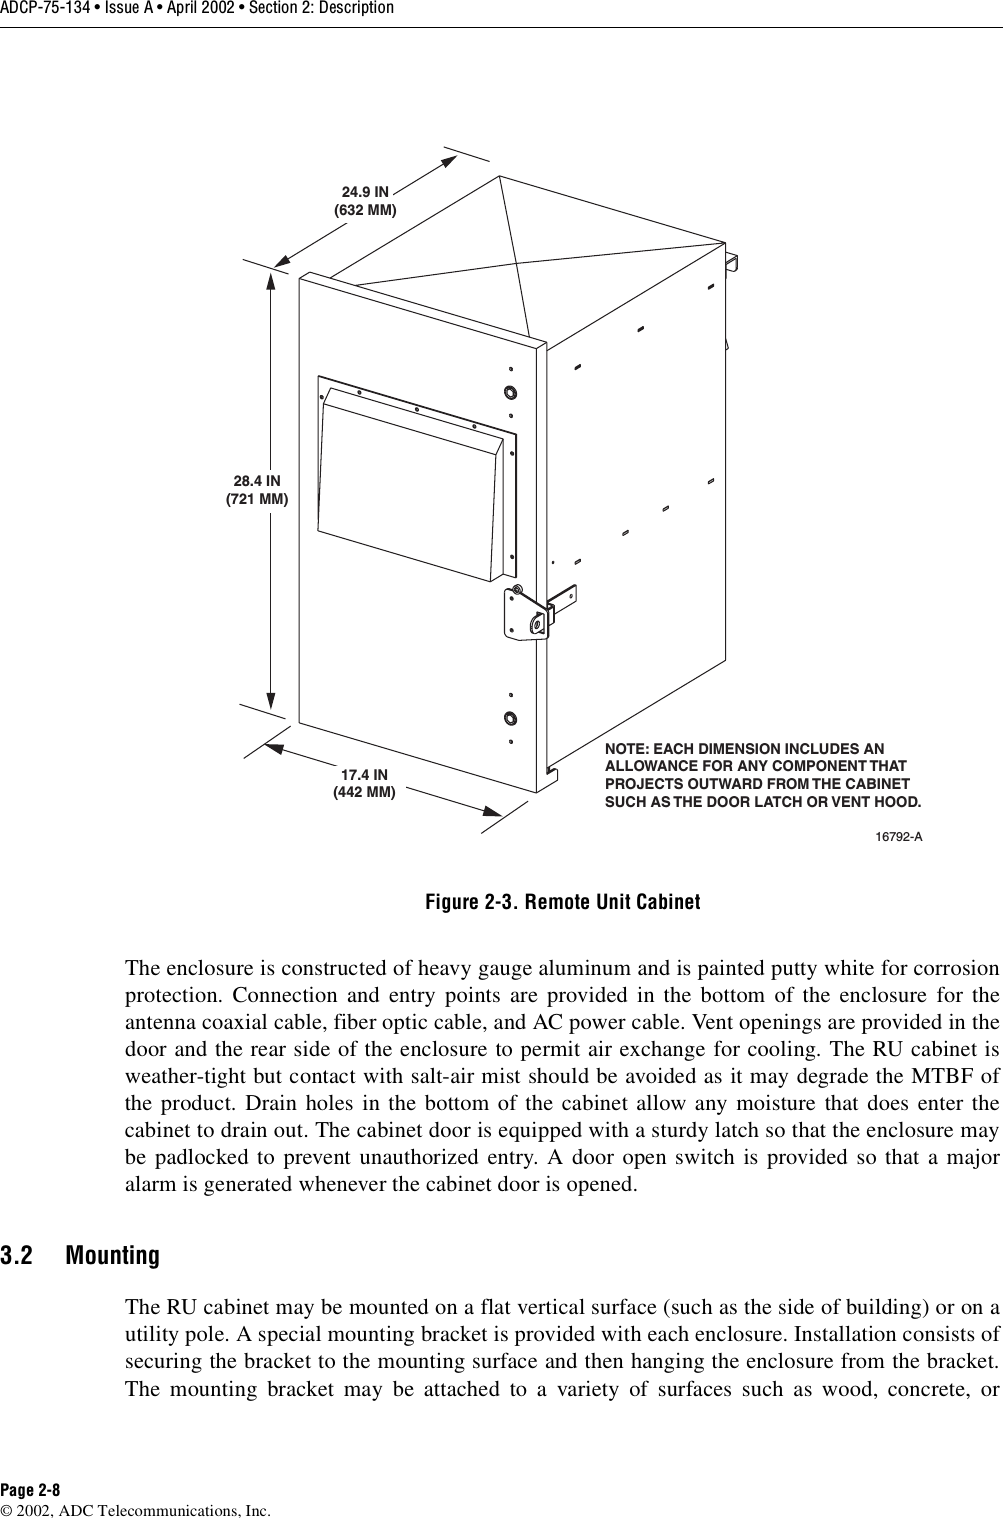 ADCP-75-134 • Issue A • April 2002 • Section 2: DescriptionPage 2-8©2002, ADC Telecommunications, Inc.Figure 2-3. Remote Unit CabinetThe enclosure is constructed of heavy gauge aluminum and is painted putty white for corrosionprotection. Connection and entry points are provided in the bottom of the enclosure for theantenna coaxial cable, fiber optic cable, and AC power cable. Vent openings are provided in thedoor and the rear side of the enclosure to permit air exchange for cooling. The RU cabinet isweather-tight but contact with salt-air mist should be avoided as it may degrade the MTBF ofthe product. Drain holes in the bottom of the cabinet allow any moisture that does enter thecabinet to drain out. The cabinet door is equipped with asturdy latch so that the enclosure maybe padlocked to prevent unauthorized entry. Adoor open switch is provided so that amajoralarm is generated whenever the cabinet door is opened.3.2 MountingThe RU cabinet may be mounted on aflat vertical surface (such as the side of building) or on autility pole. Aspecial mounting bracket is provided with each enclosure. Installation consists ofsecuring the bracket to the mounting surface and then hanging the enclosure from the bracket.The mounting bracket may be attached to avariety of surfaces such as wood, concrete, or16792-A24.9 IN(632 MM)28.4 IN(721 MM)17.4 IN(442 MM)NOTE: EACH DIMENSION INCLUDES ANALLOWANCE FOR ANY COMPONENT THATPROJECTS OUTWARD FROM THE CABINETSUCH AS THE DOOR LATCH OR VENT HOOD.